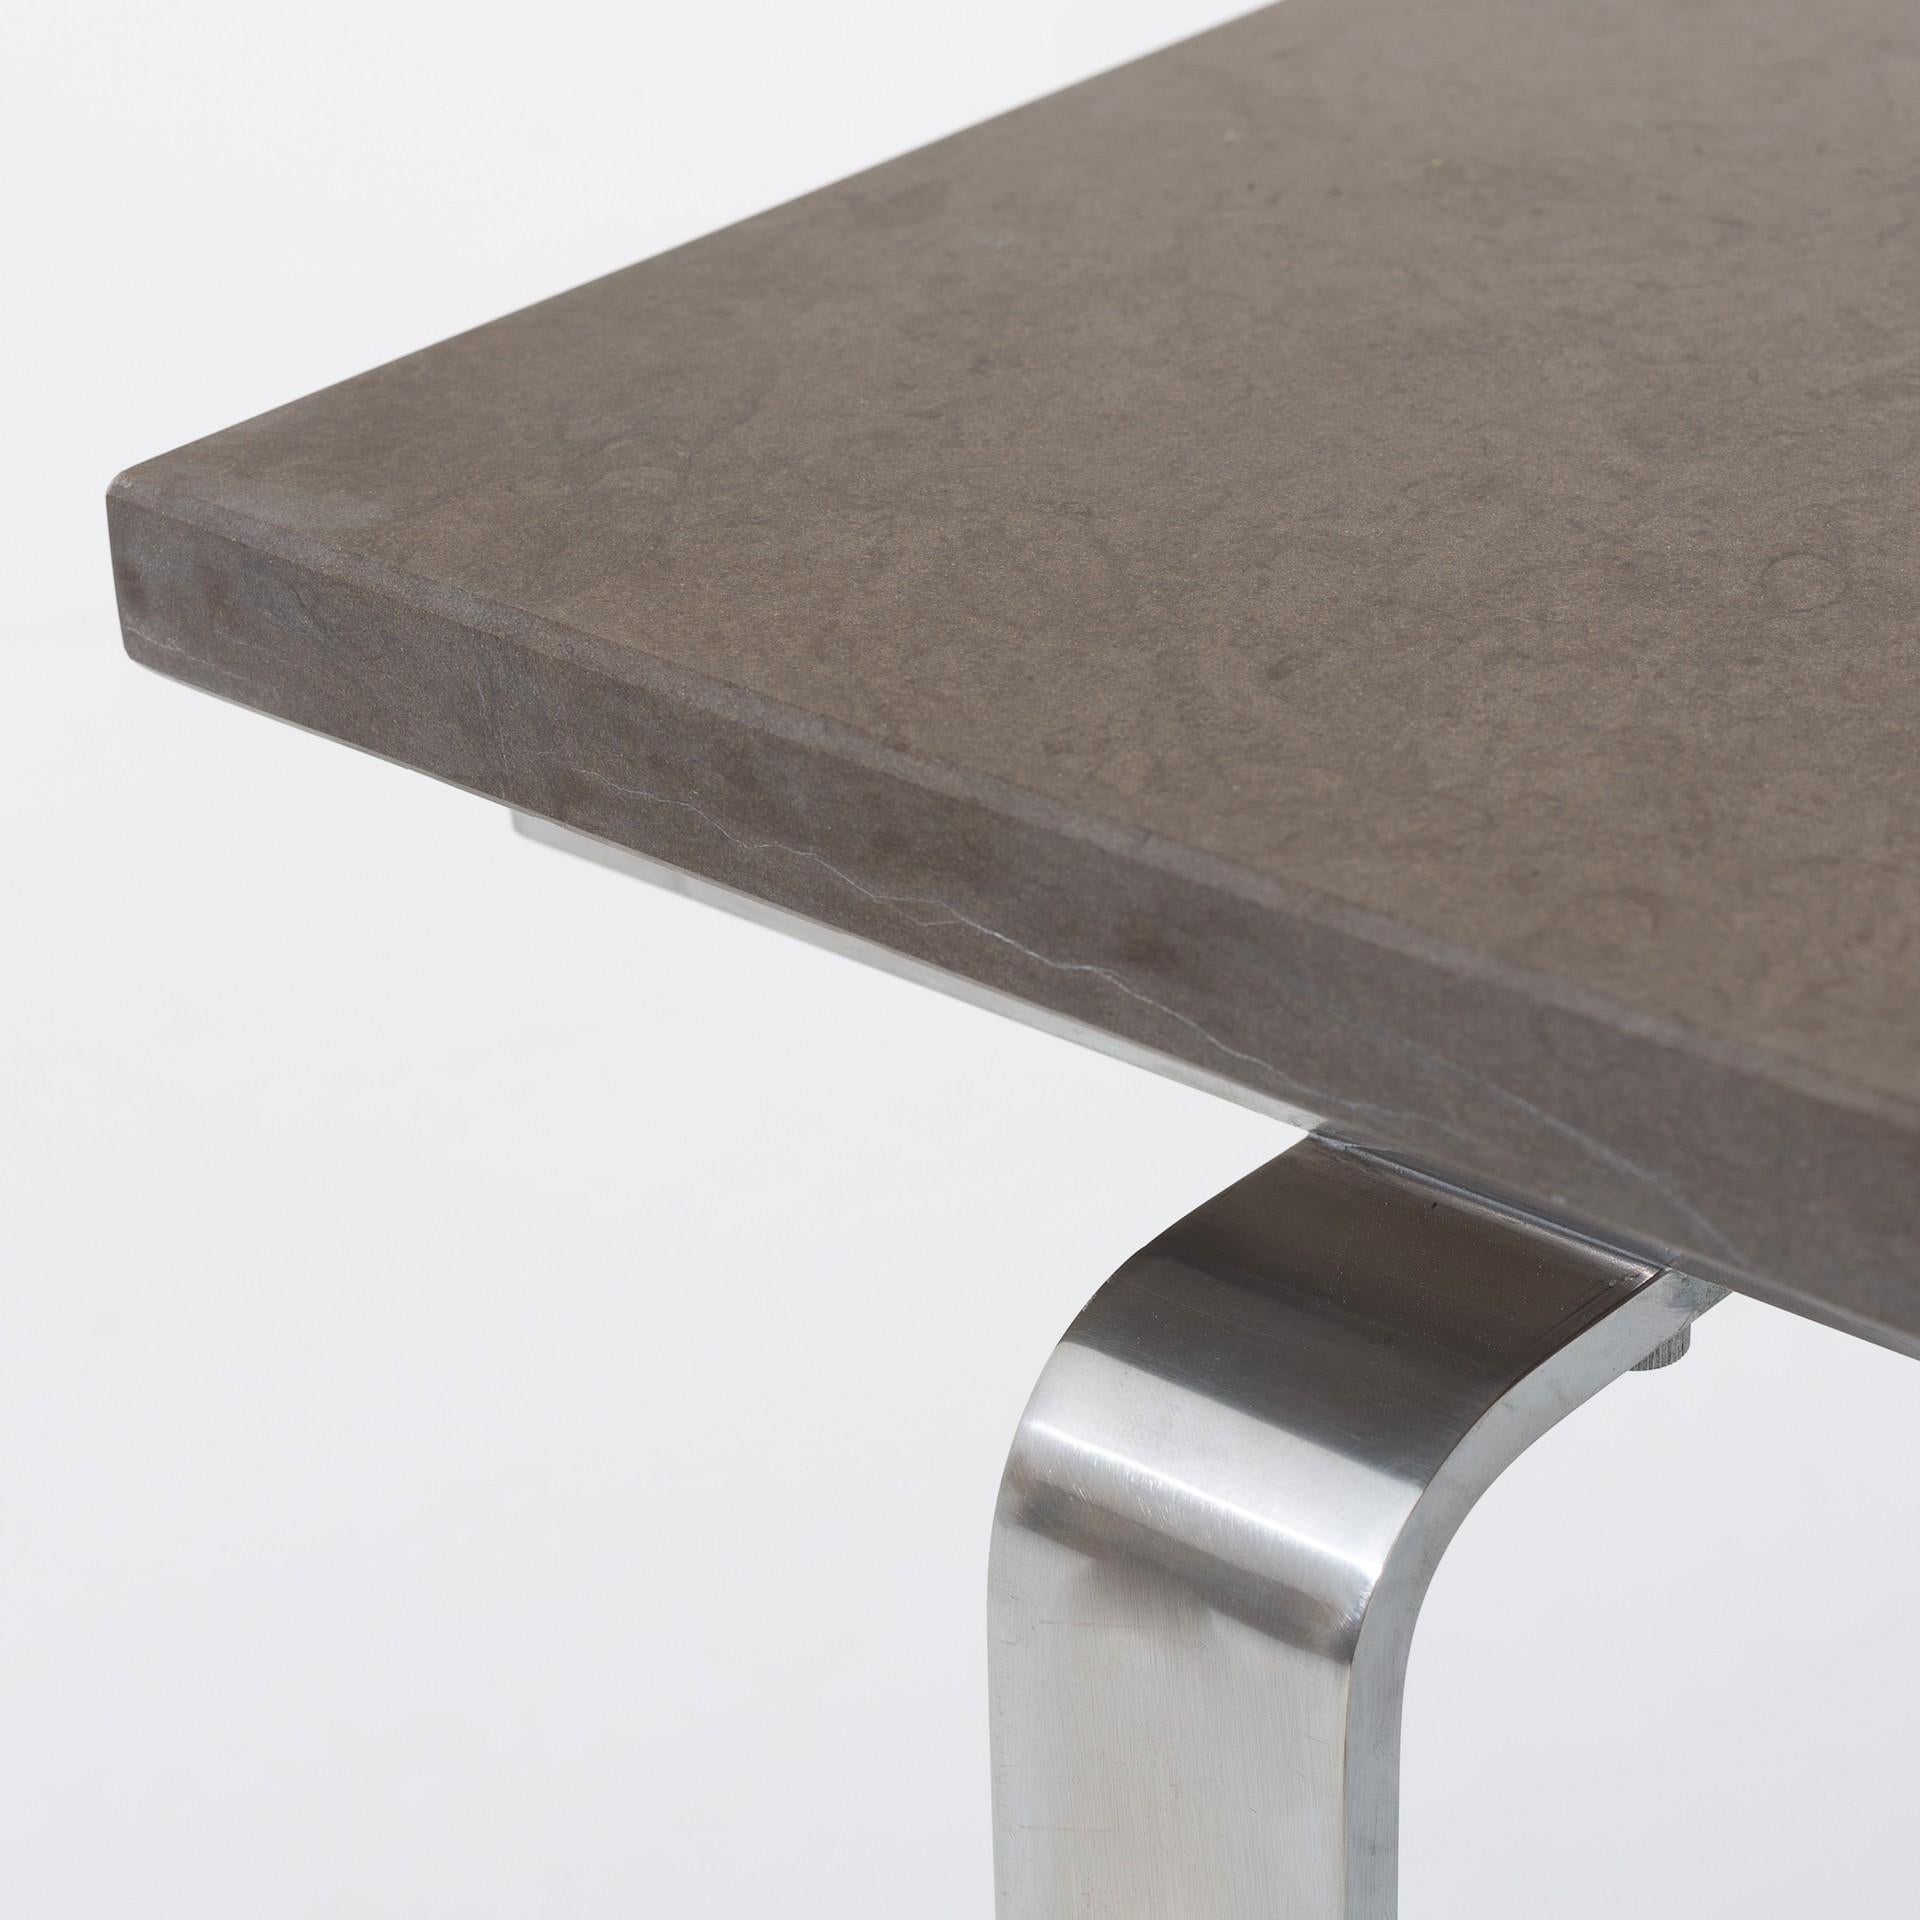 JH 808, coffee table in steel with top of grey marble. Maker Johannes Hansen.